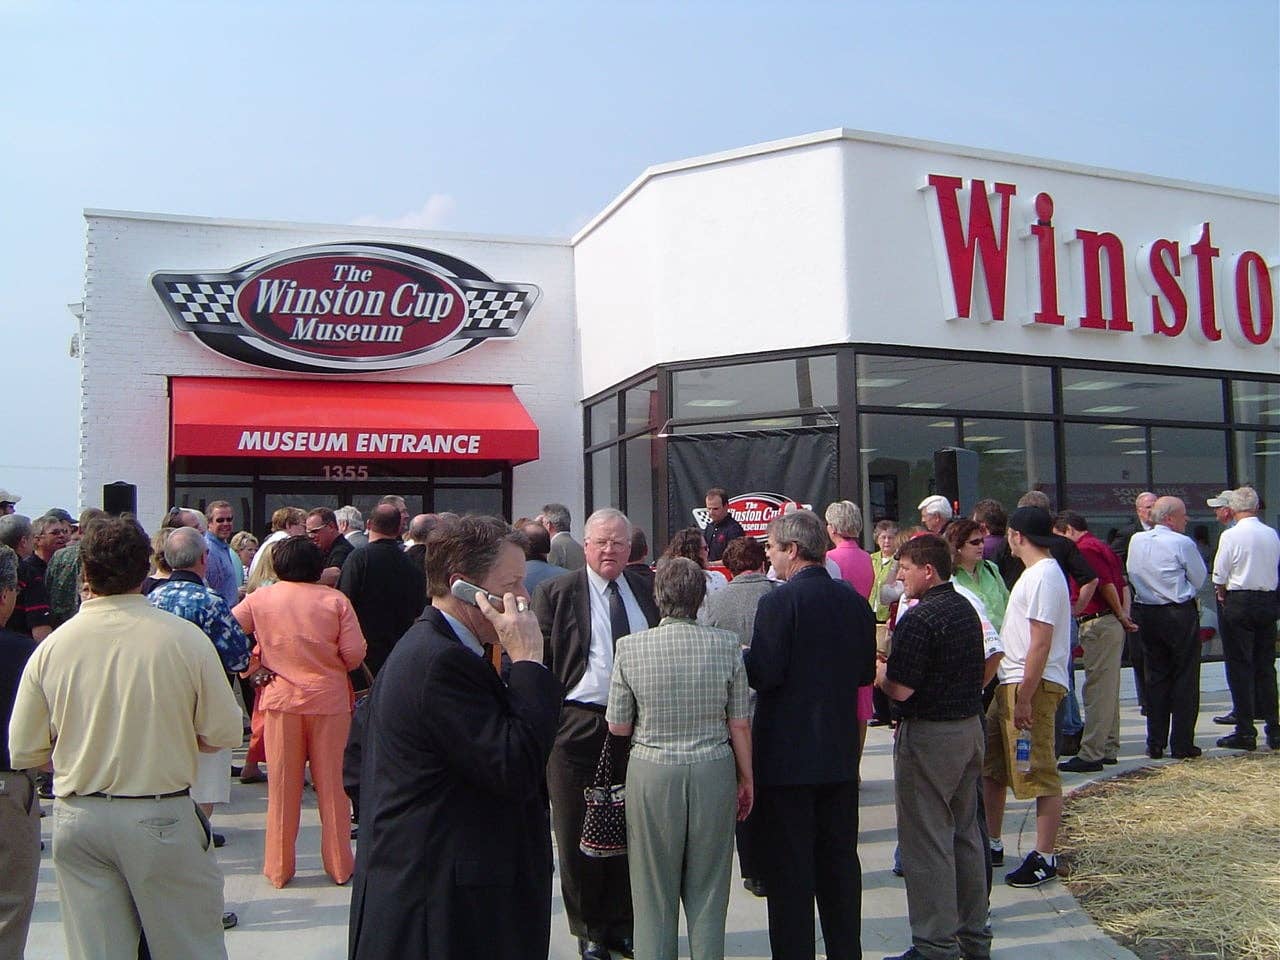 The Winston Cup Museum opening ceremony on May 11, 2005